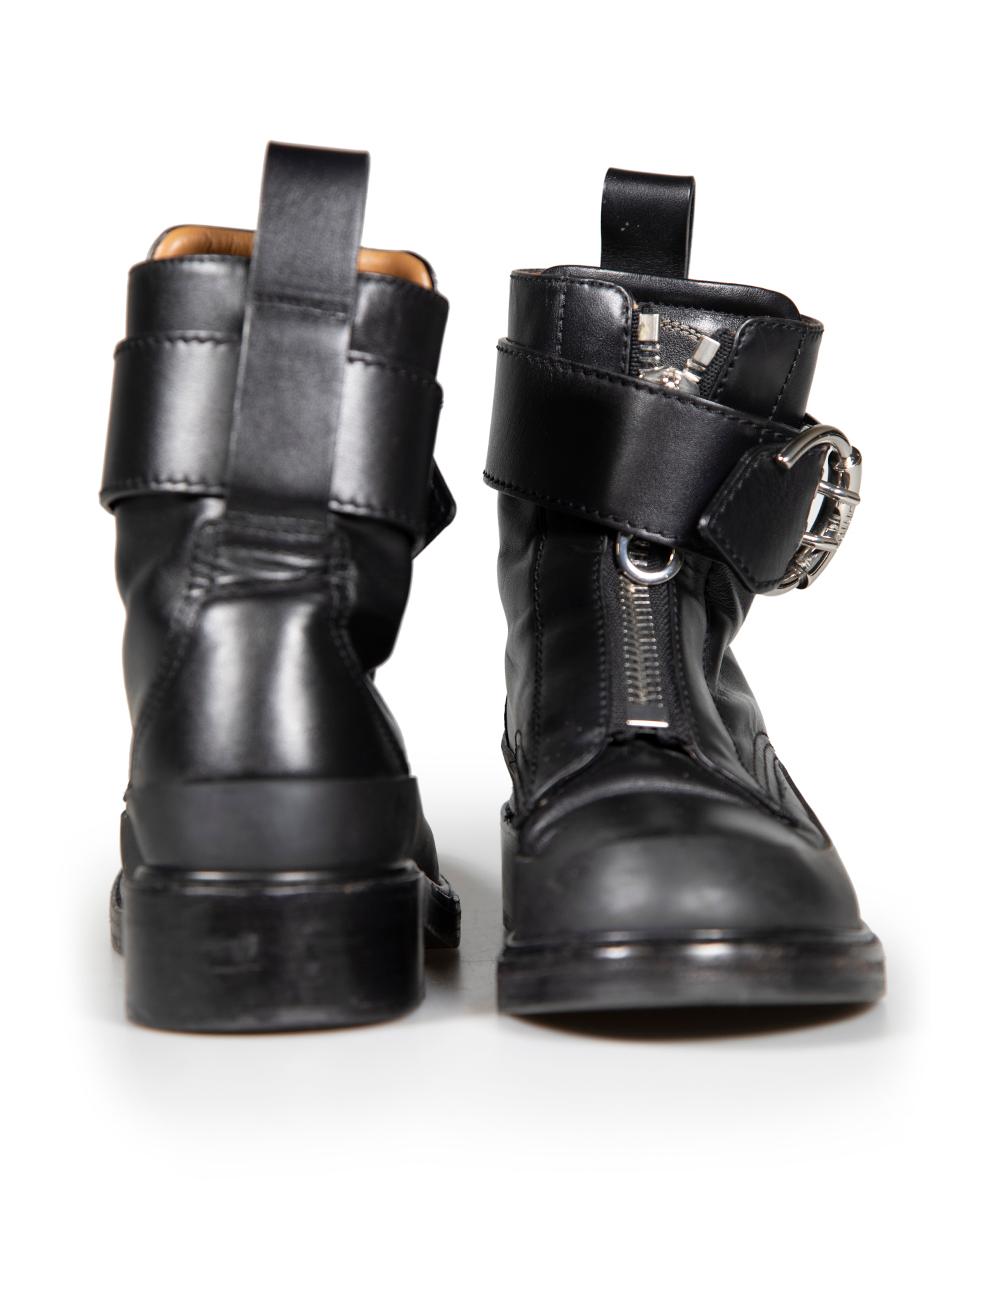 Chloé Black Leather Buckled Biker Boots Size IT 36 In Good Condition For Sale In London, GB